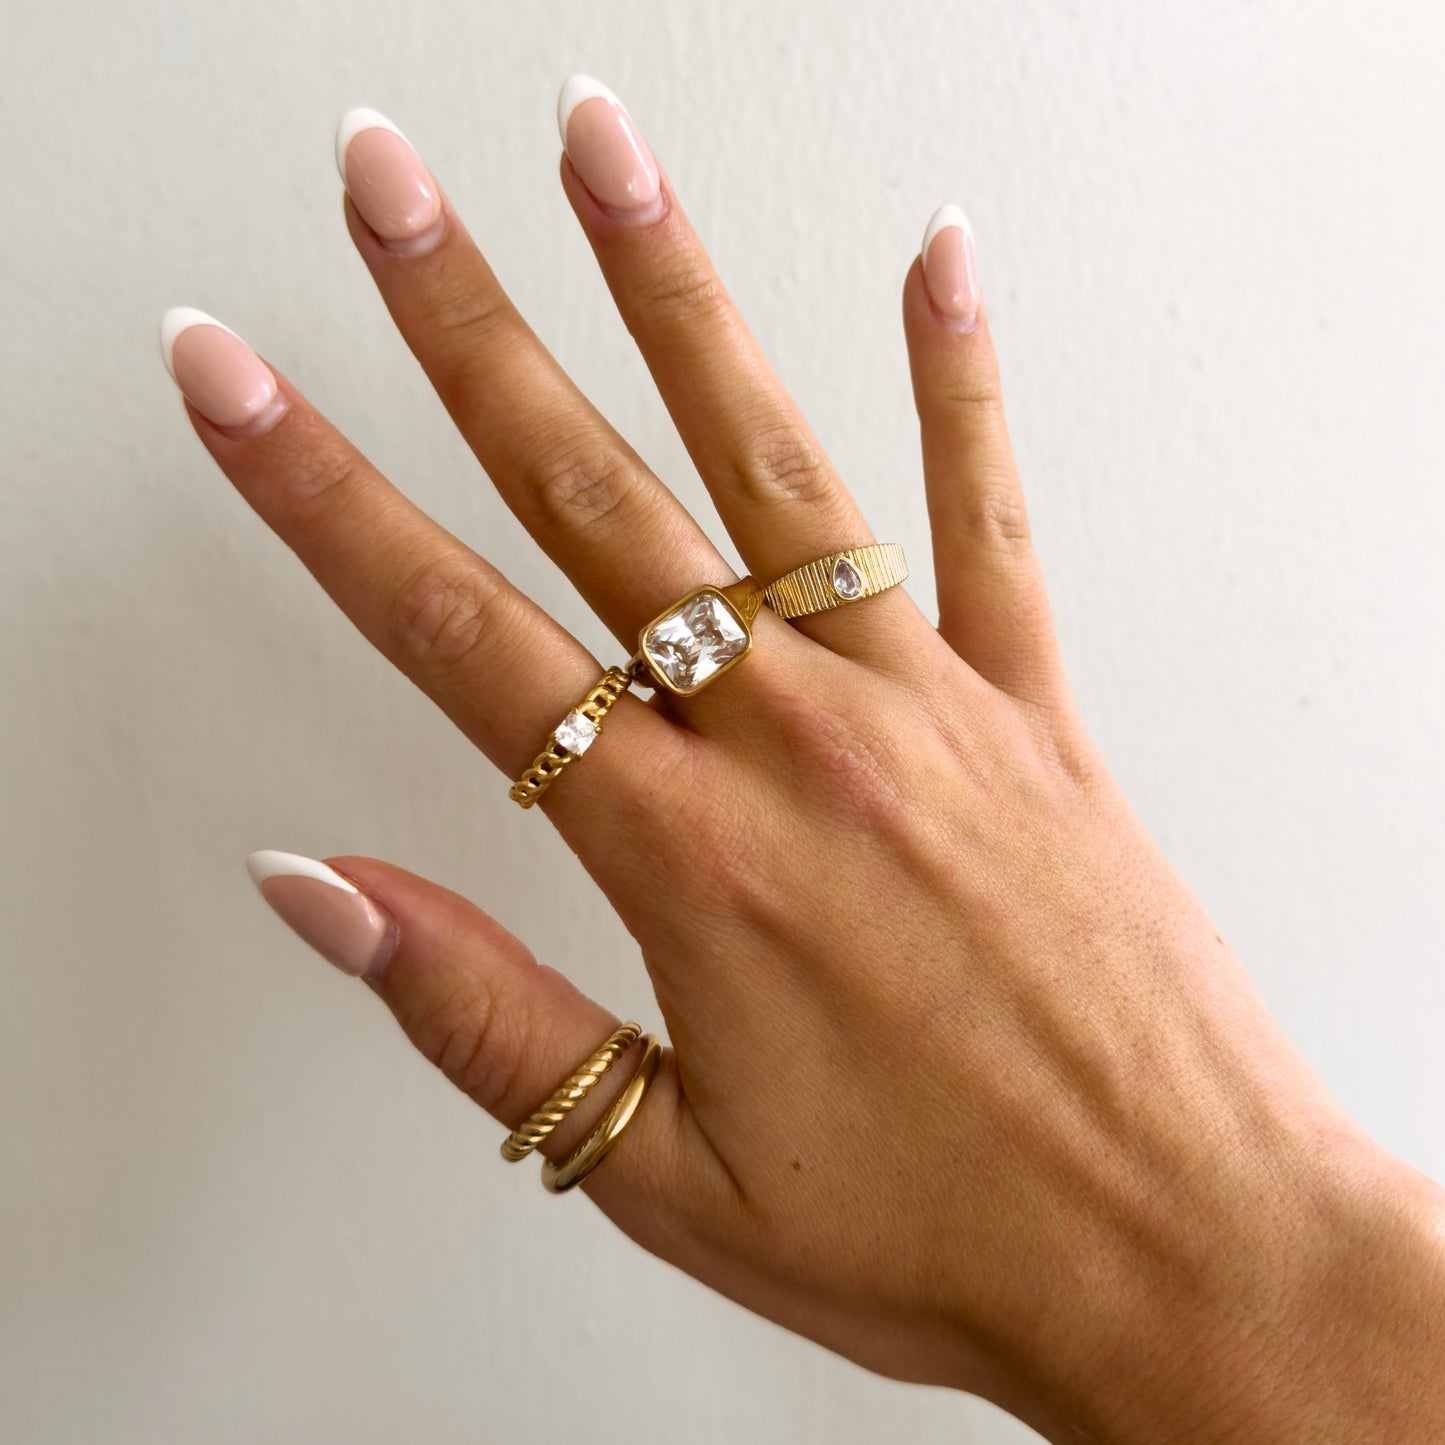 Braided Stack Ring, layered gold statement ring, gold filled ring, rings for women, braid twist ring, stackable rings, ring set ring stack